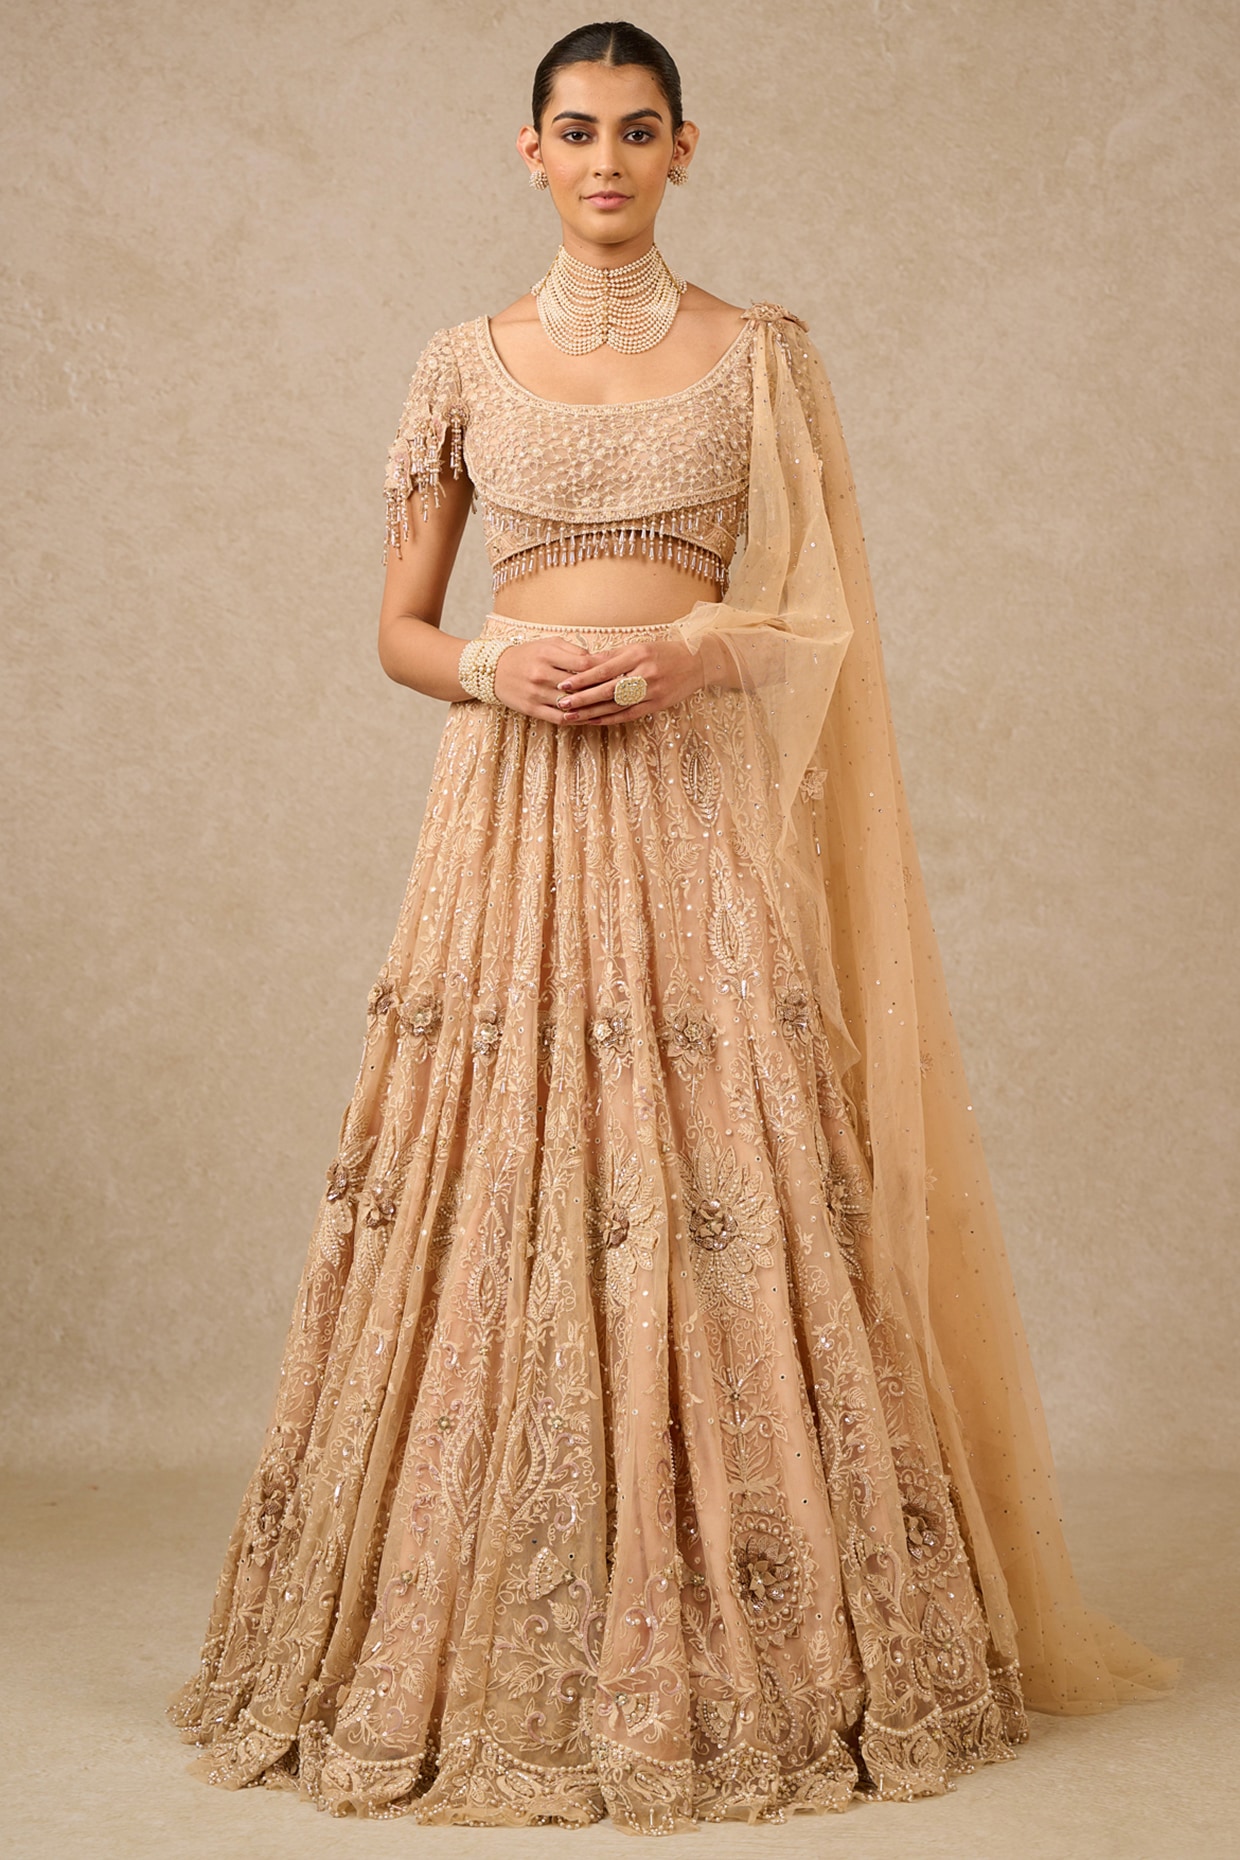 Amazon Great Indian Festival 2022: Amp Up Your Ethnic Style This Festive  Season With These Beautiful Lehengas At Upto 70% Off